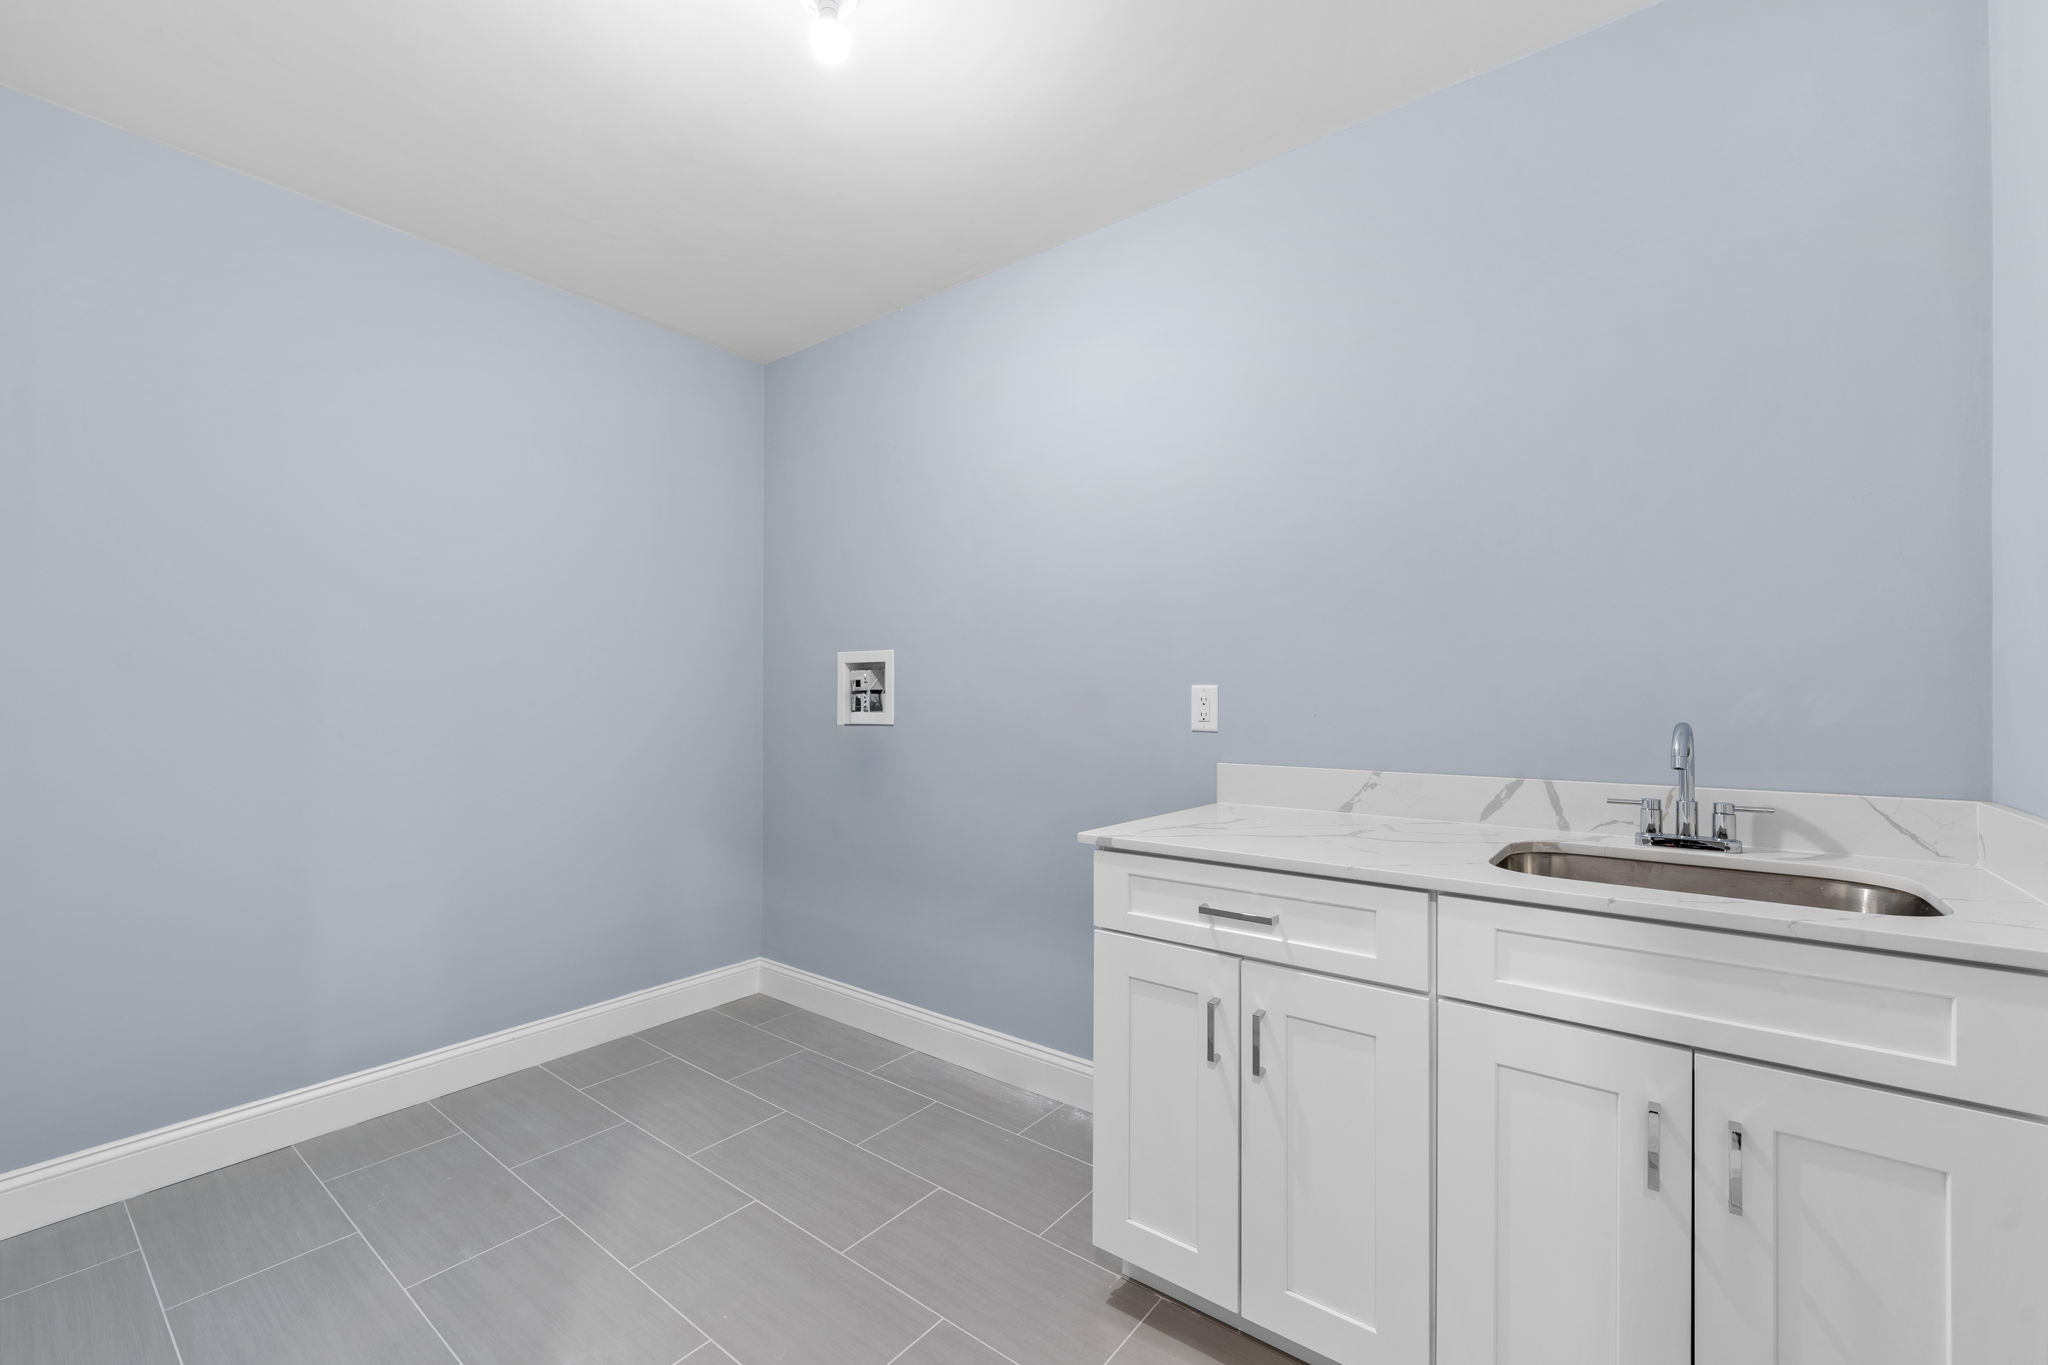 2nd Floor Laundry Room: Custom Cabinets, Quartz Countertop, Laundry Sink. Easy access electrical sub panel!